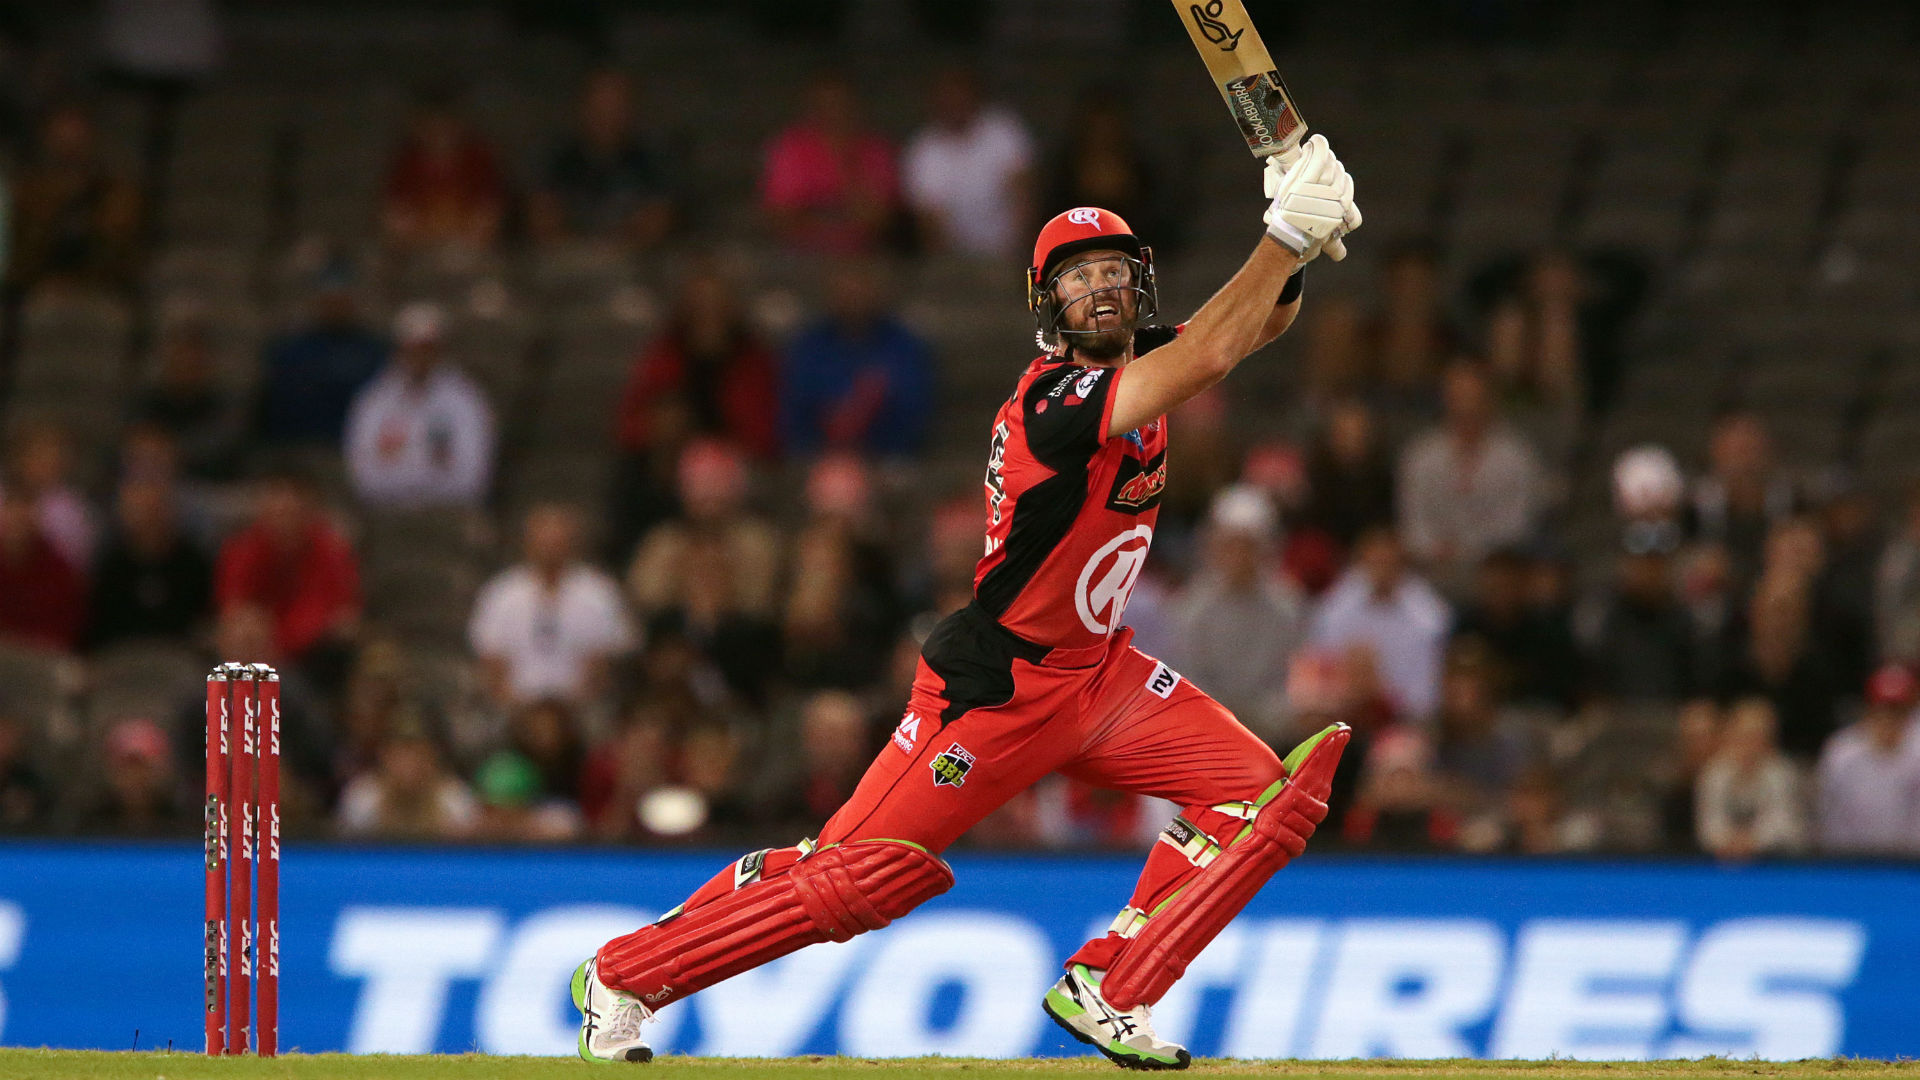 Dan Christian and Kane Richardson sent Melbourne Renegades to their first Big Bash League final, and a derby date with Melbourne Stars.